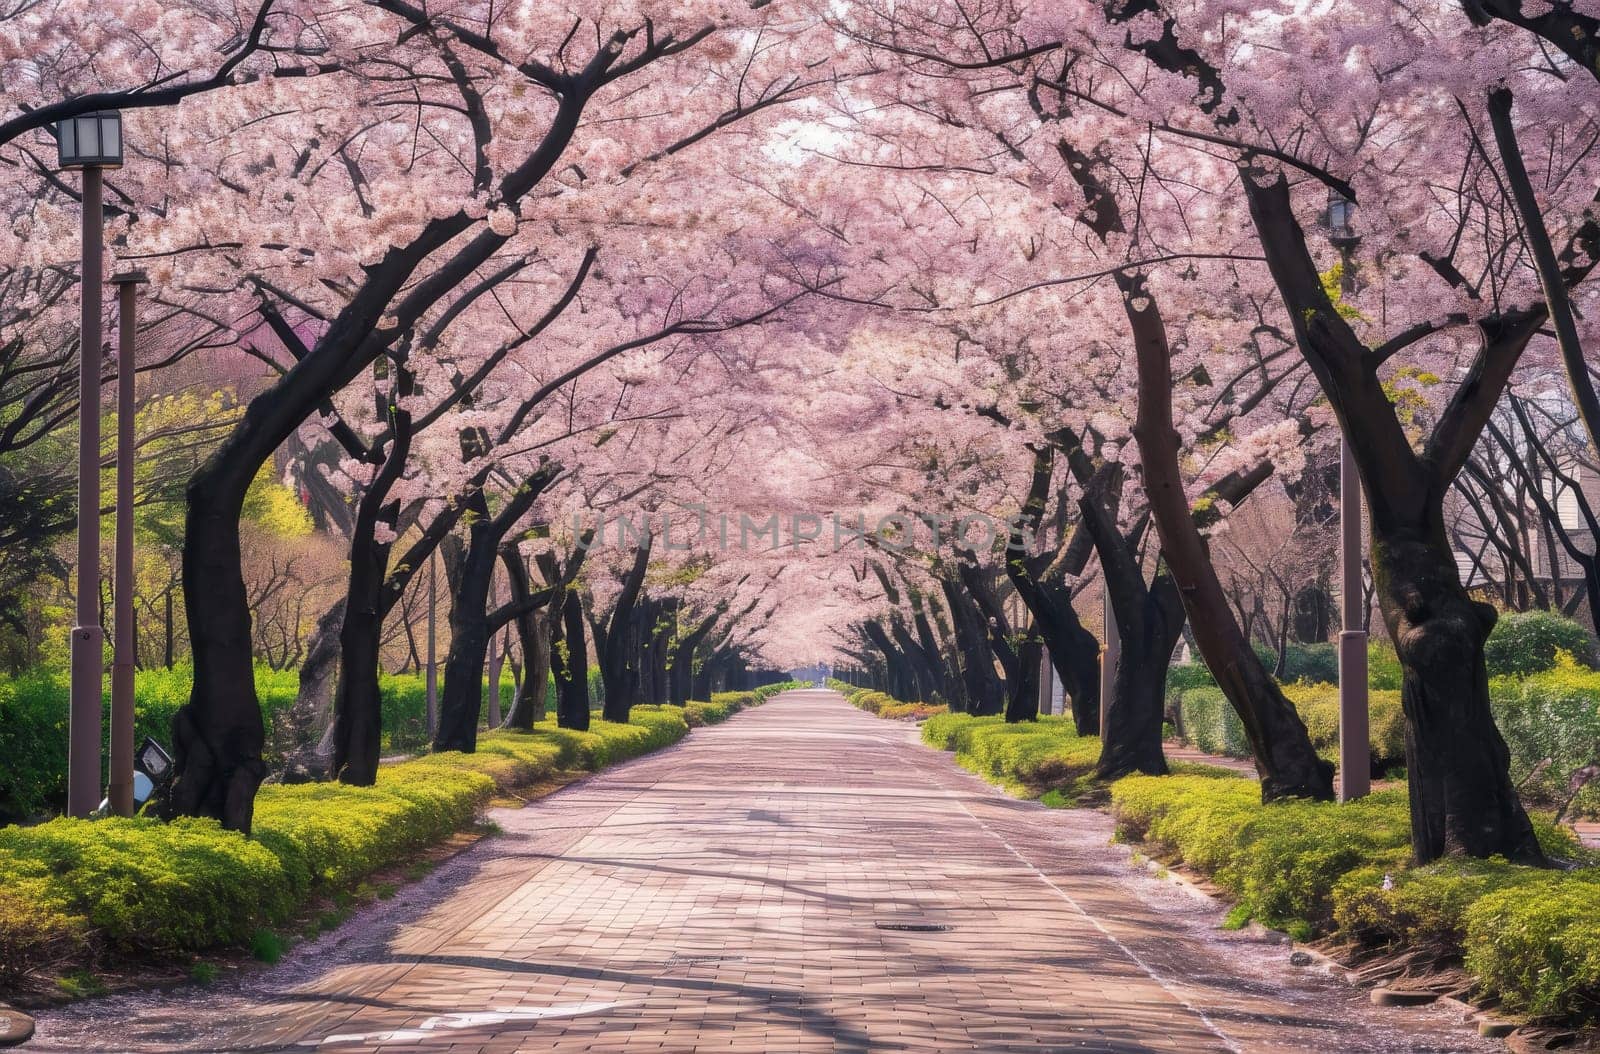 Beautiful Street With an Abundance of Pink Trees by gcm